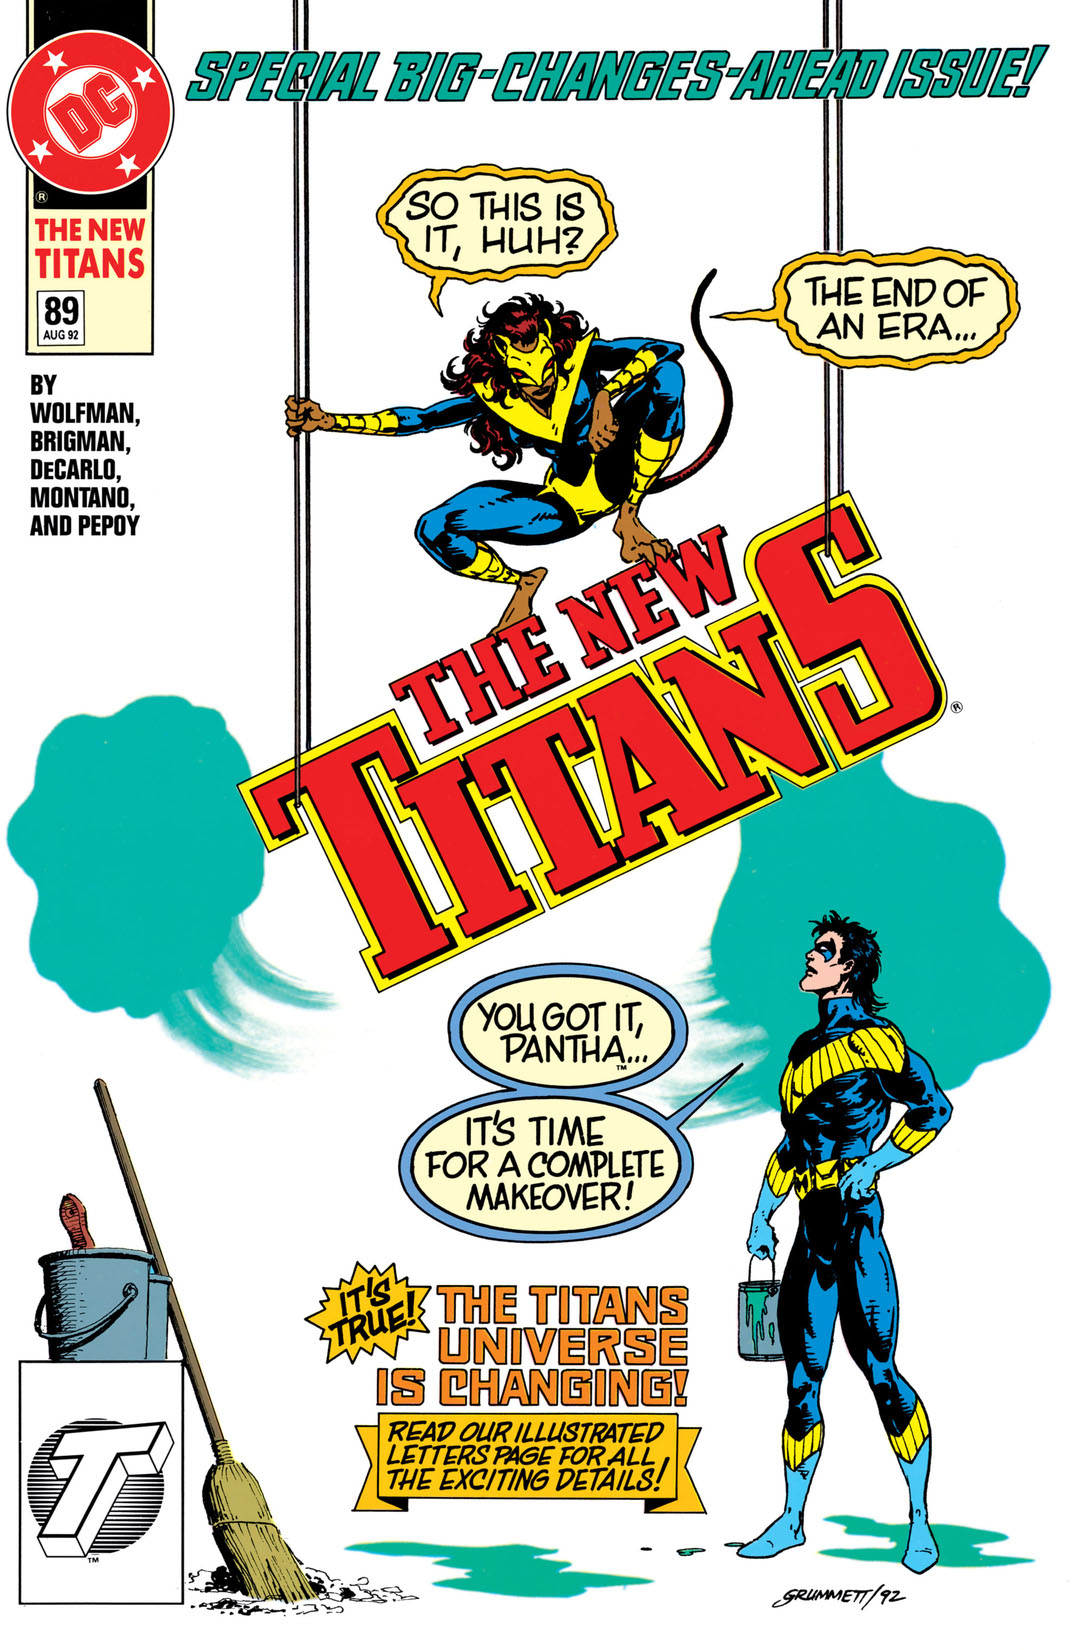 The New Titans #89 preview images